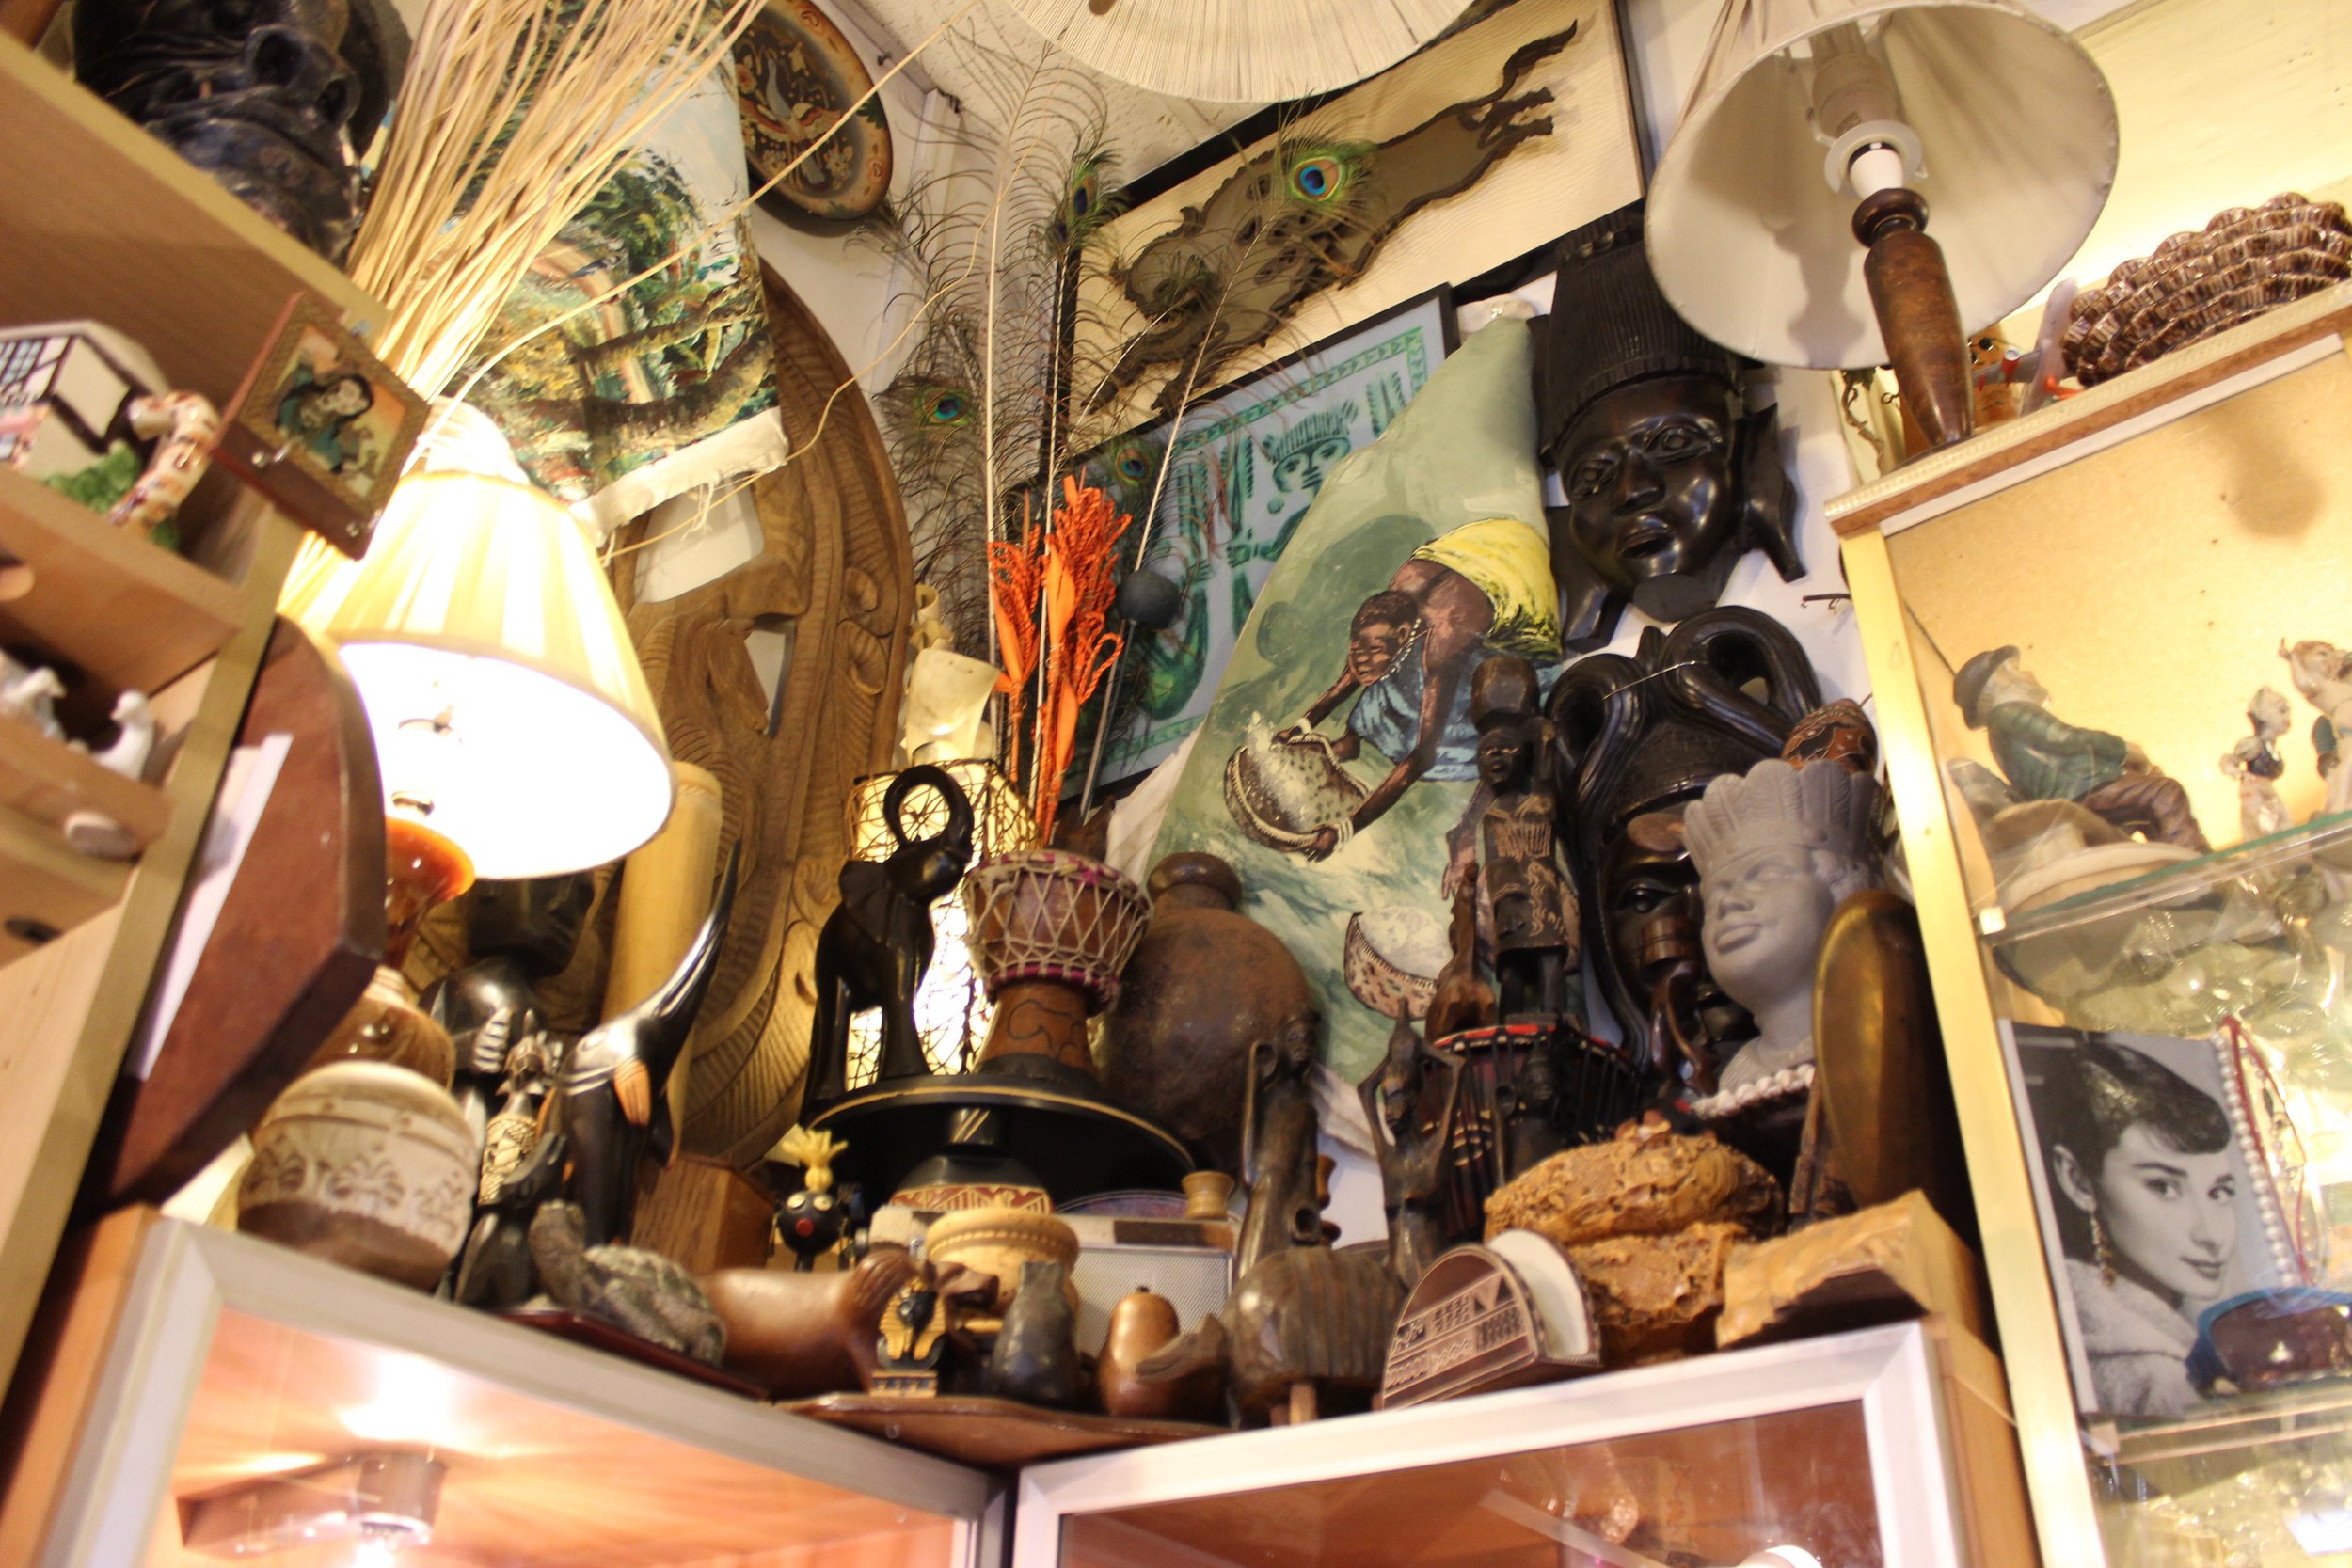 Ecelctica Bric a brac records collectibles and antiques shop in battersea South West Lonodn Club Card 7.jpg